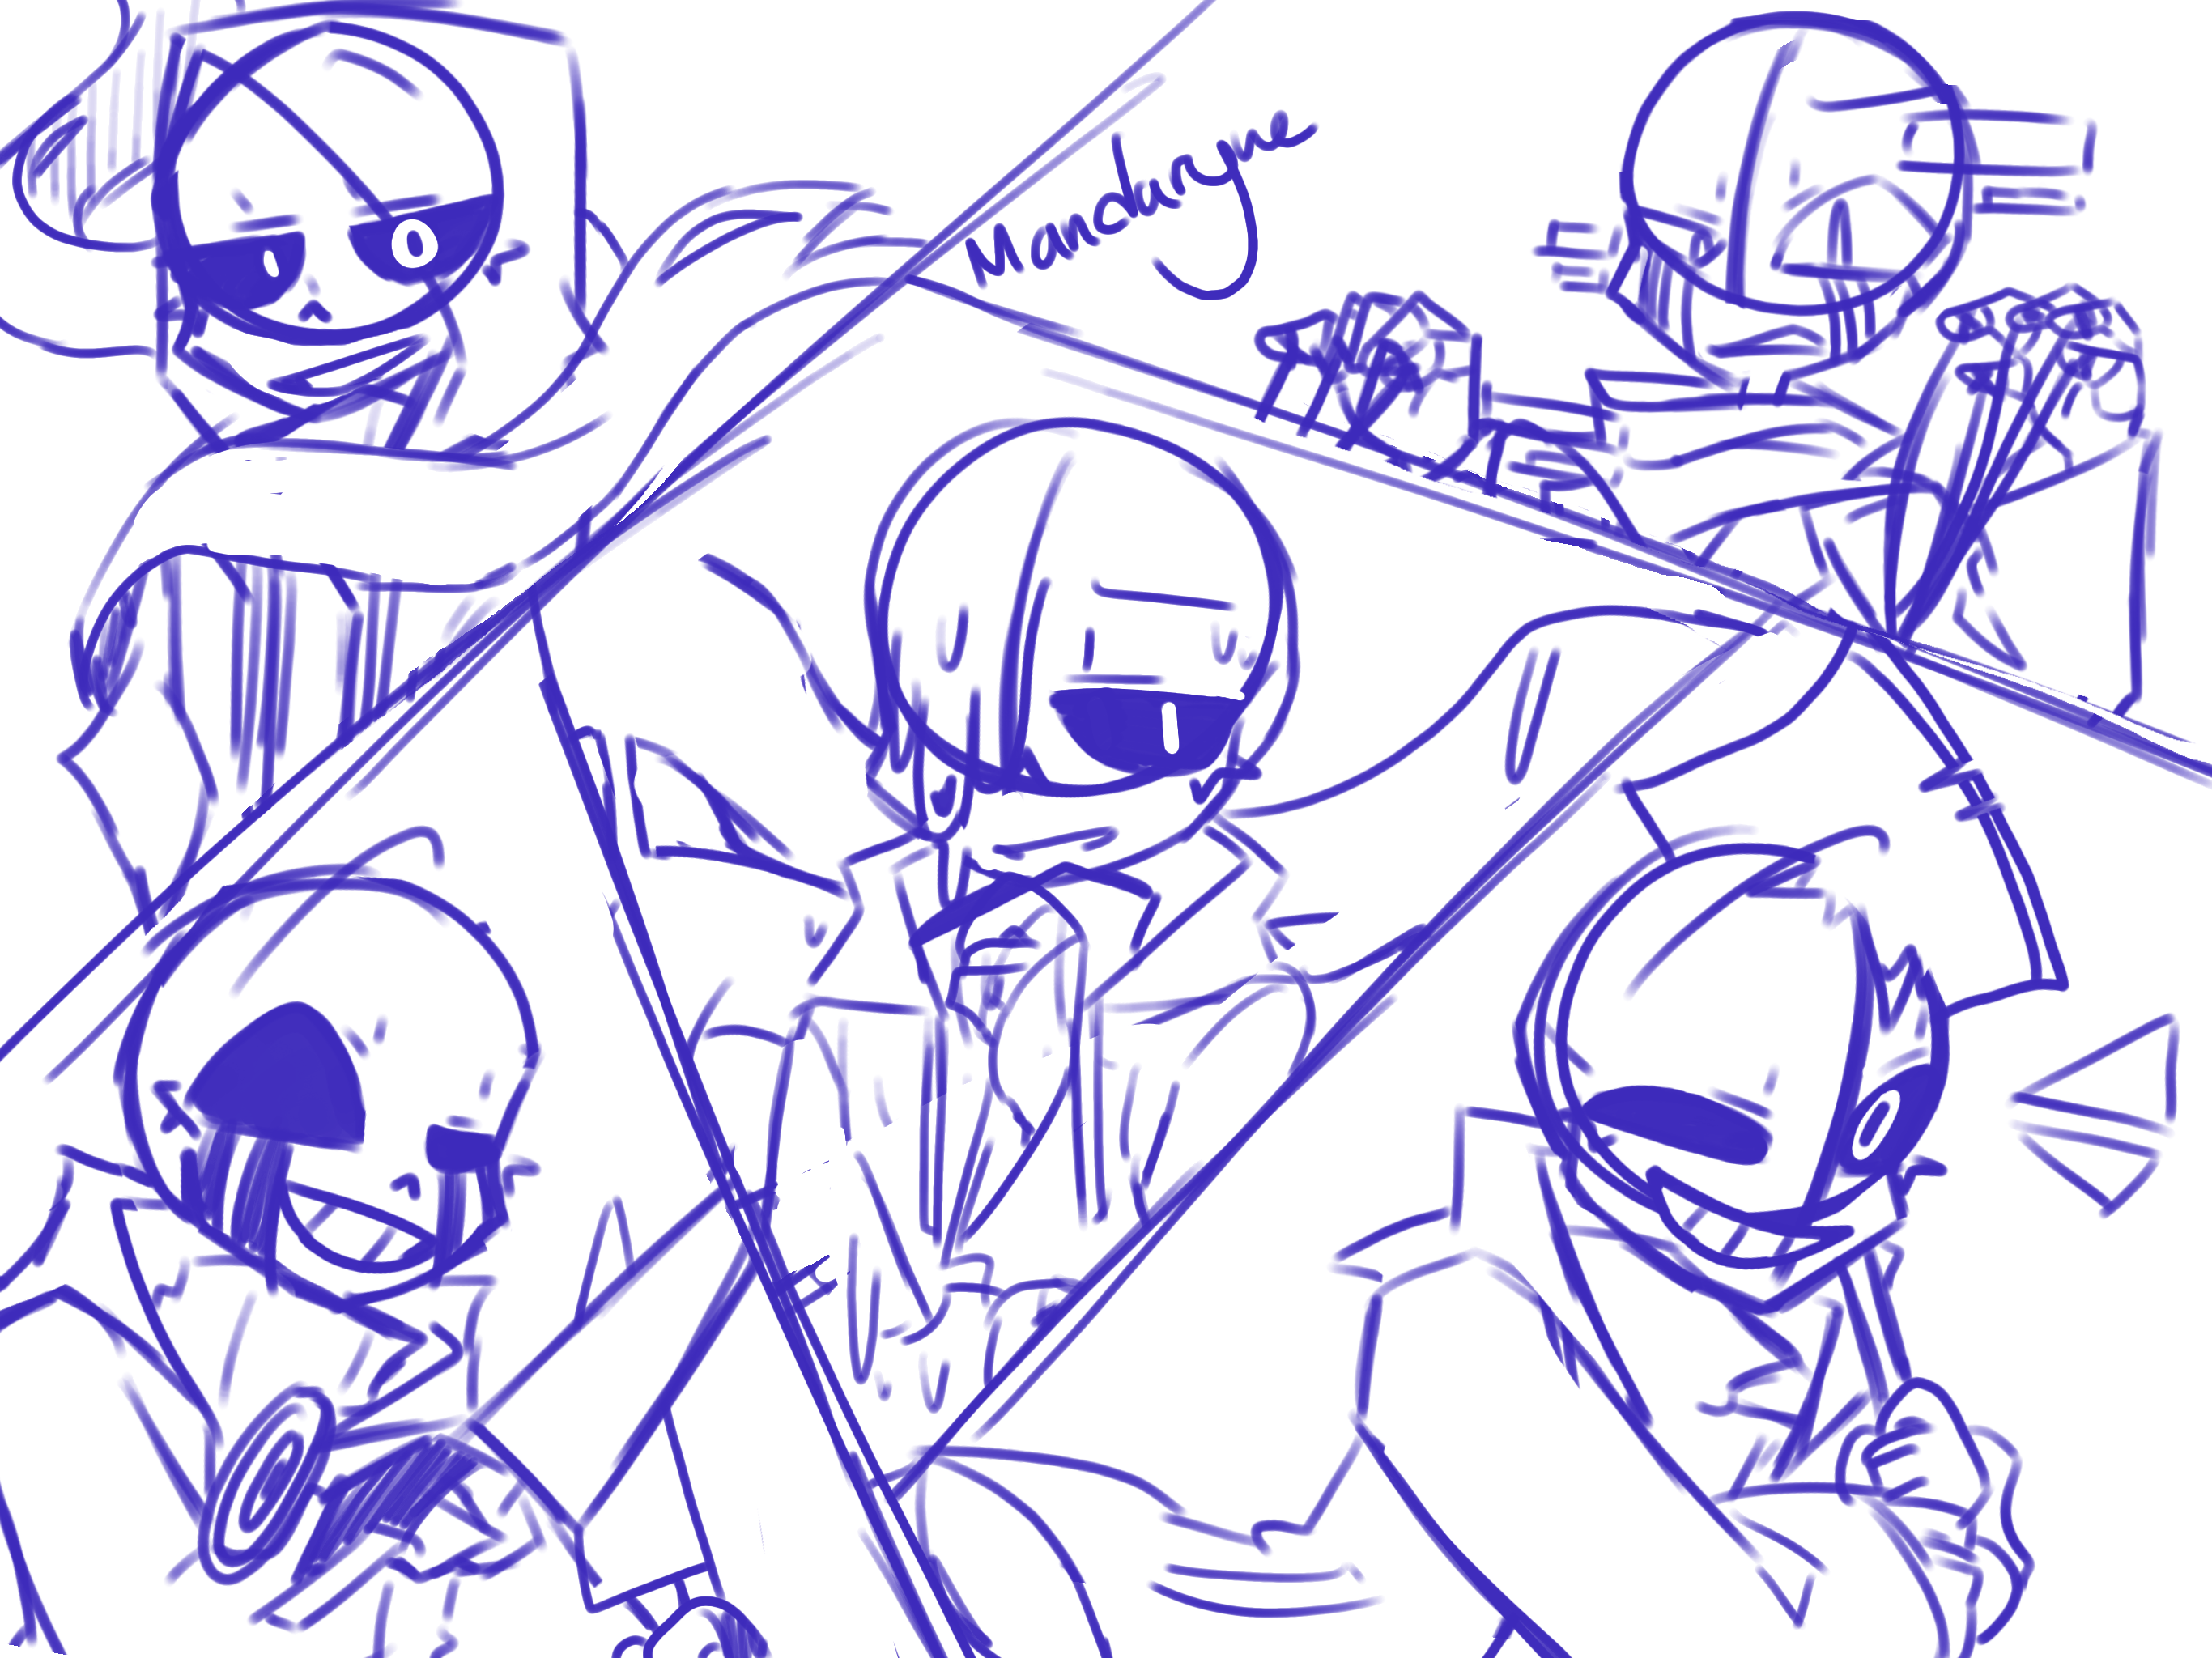 Here are the bad sans's